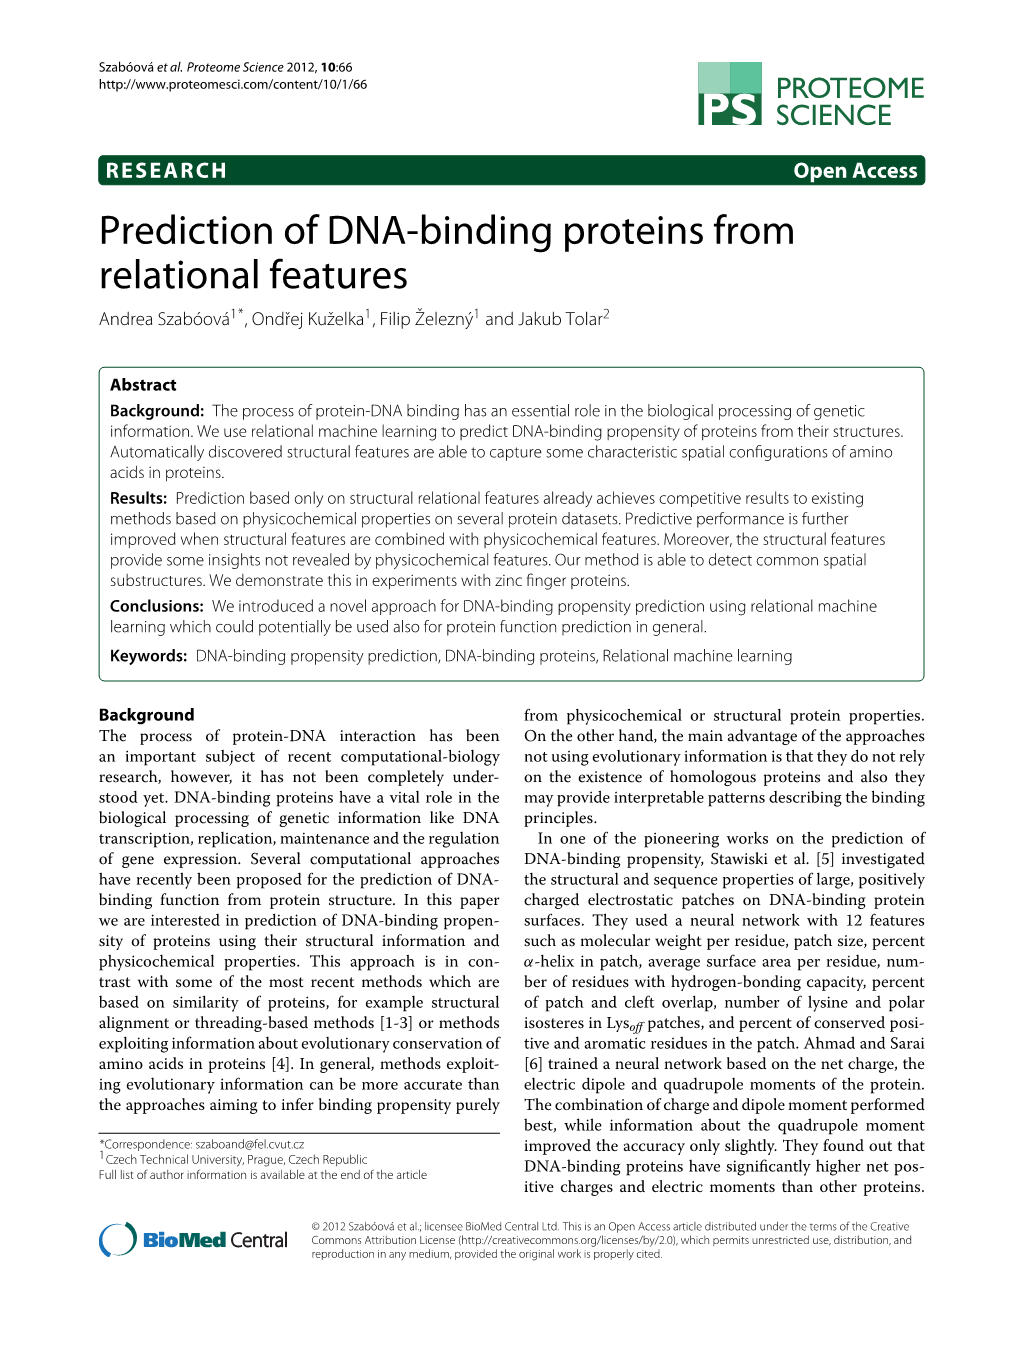 Prediction of DNA-Binding Proteins from Relational Features Andrea Szaboov´ A´1*, Ondˇrej Kuzelkaˇ 1, Filip Zeleznˇ Y´1 and Jakub Tolar2